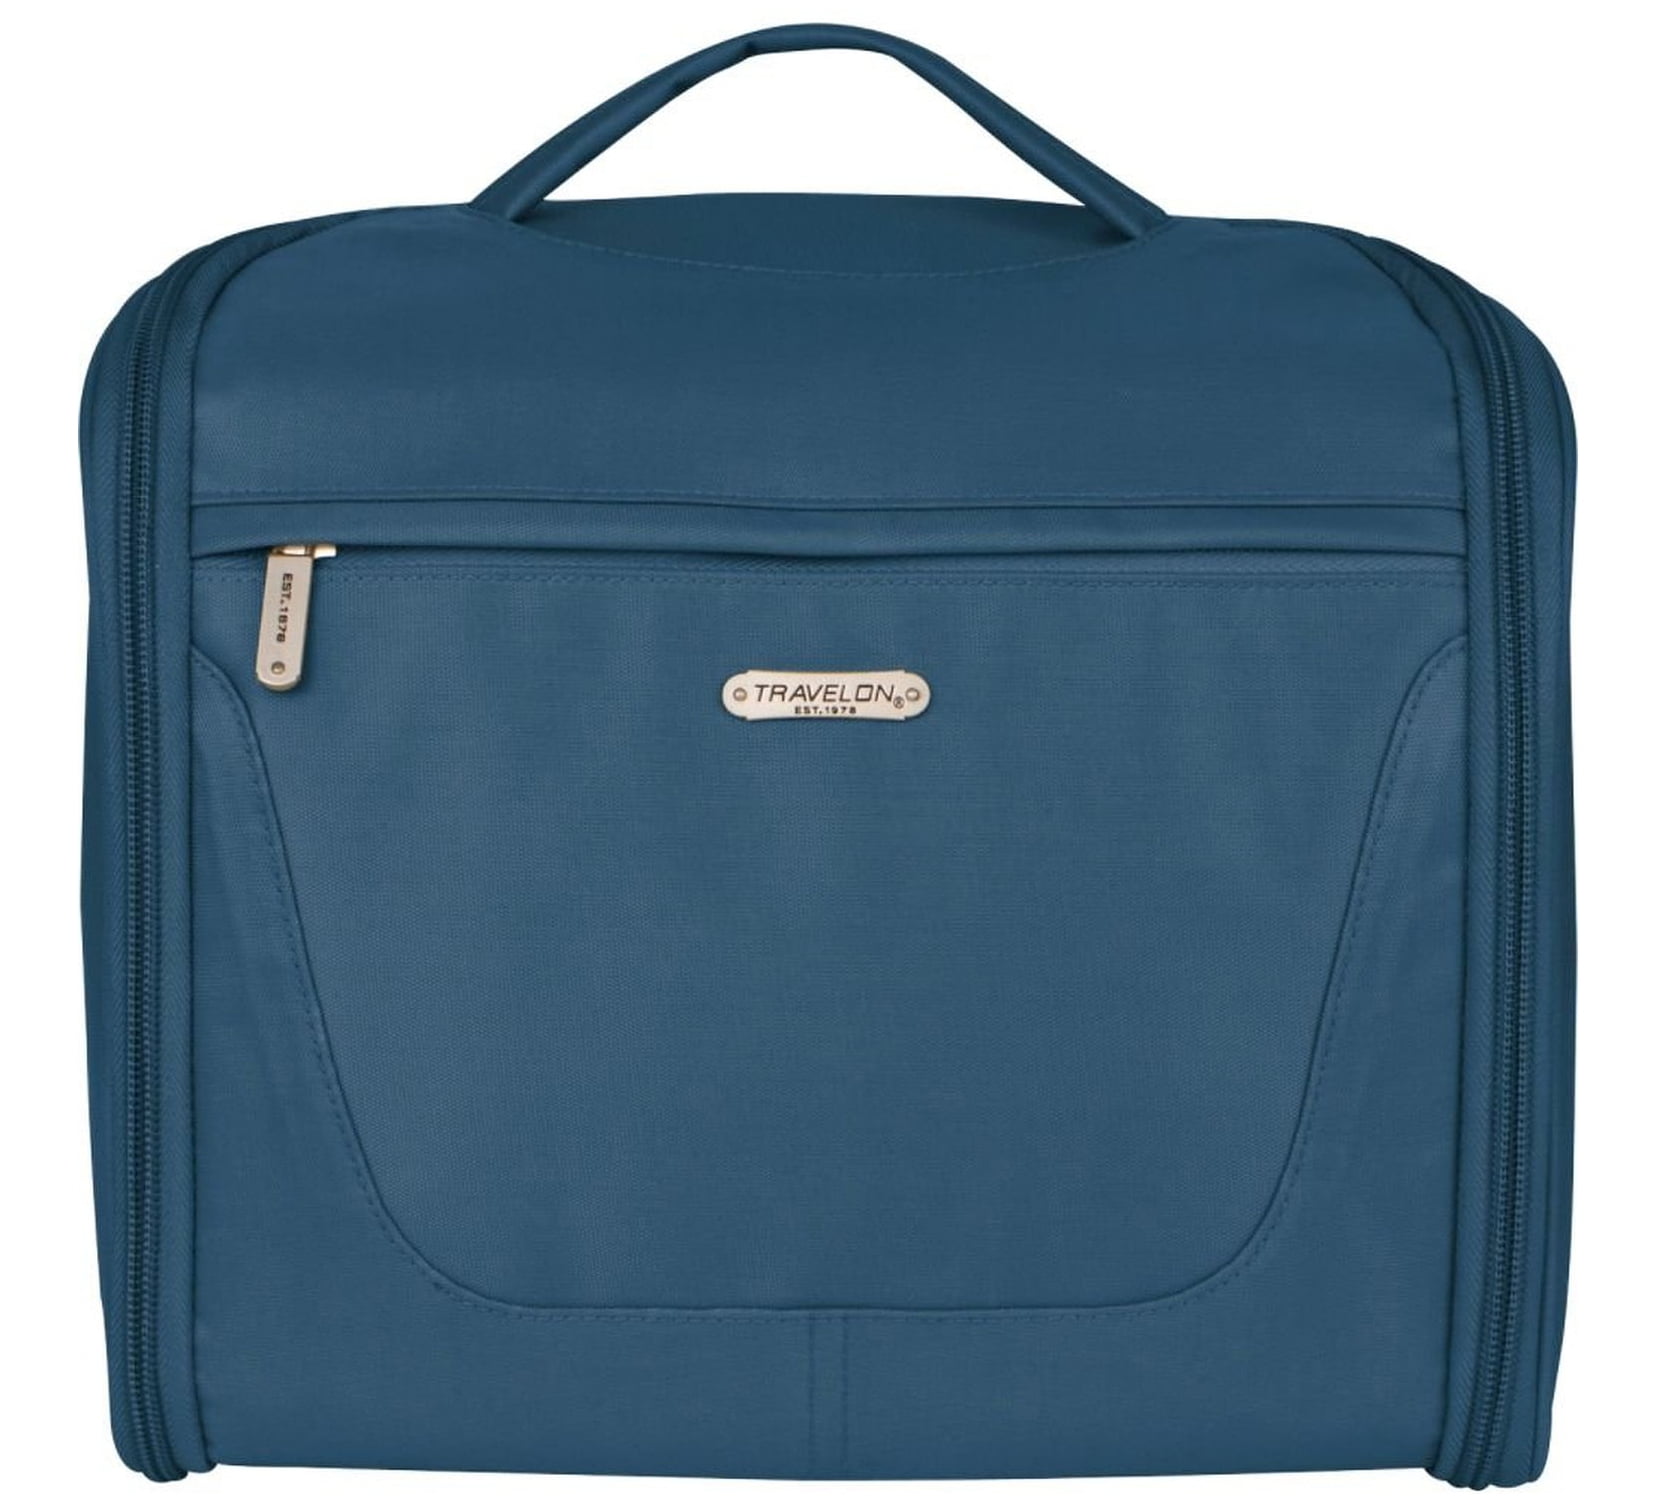 dispersion Hearing Specificity Travelon Mini Independence Bag, Blue - Walmart.com